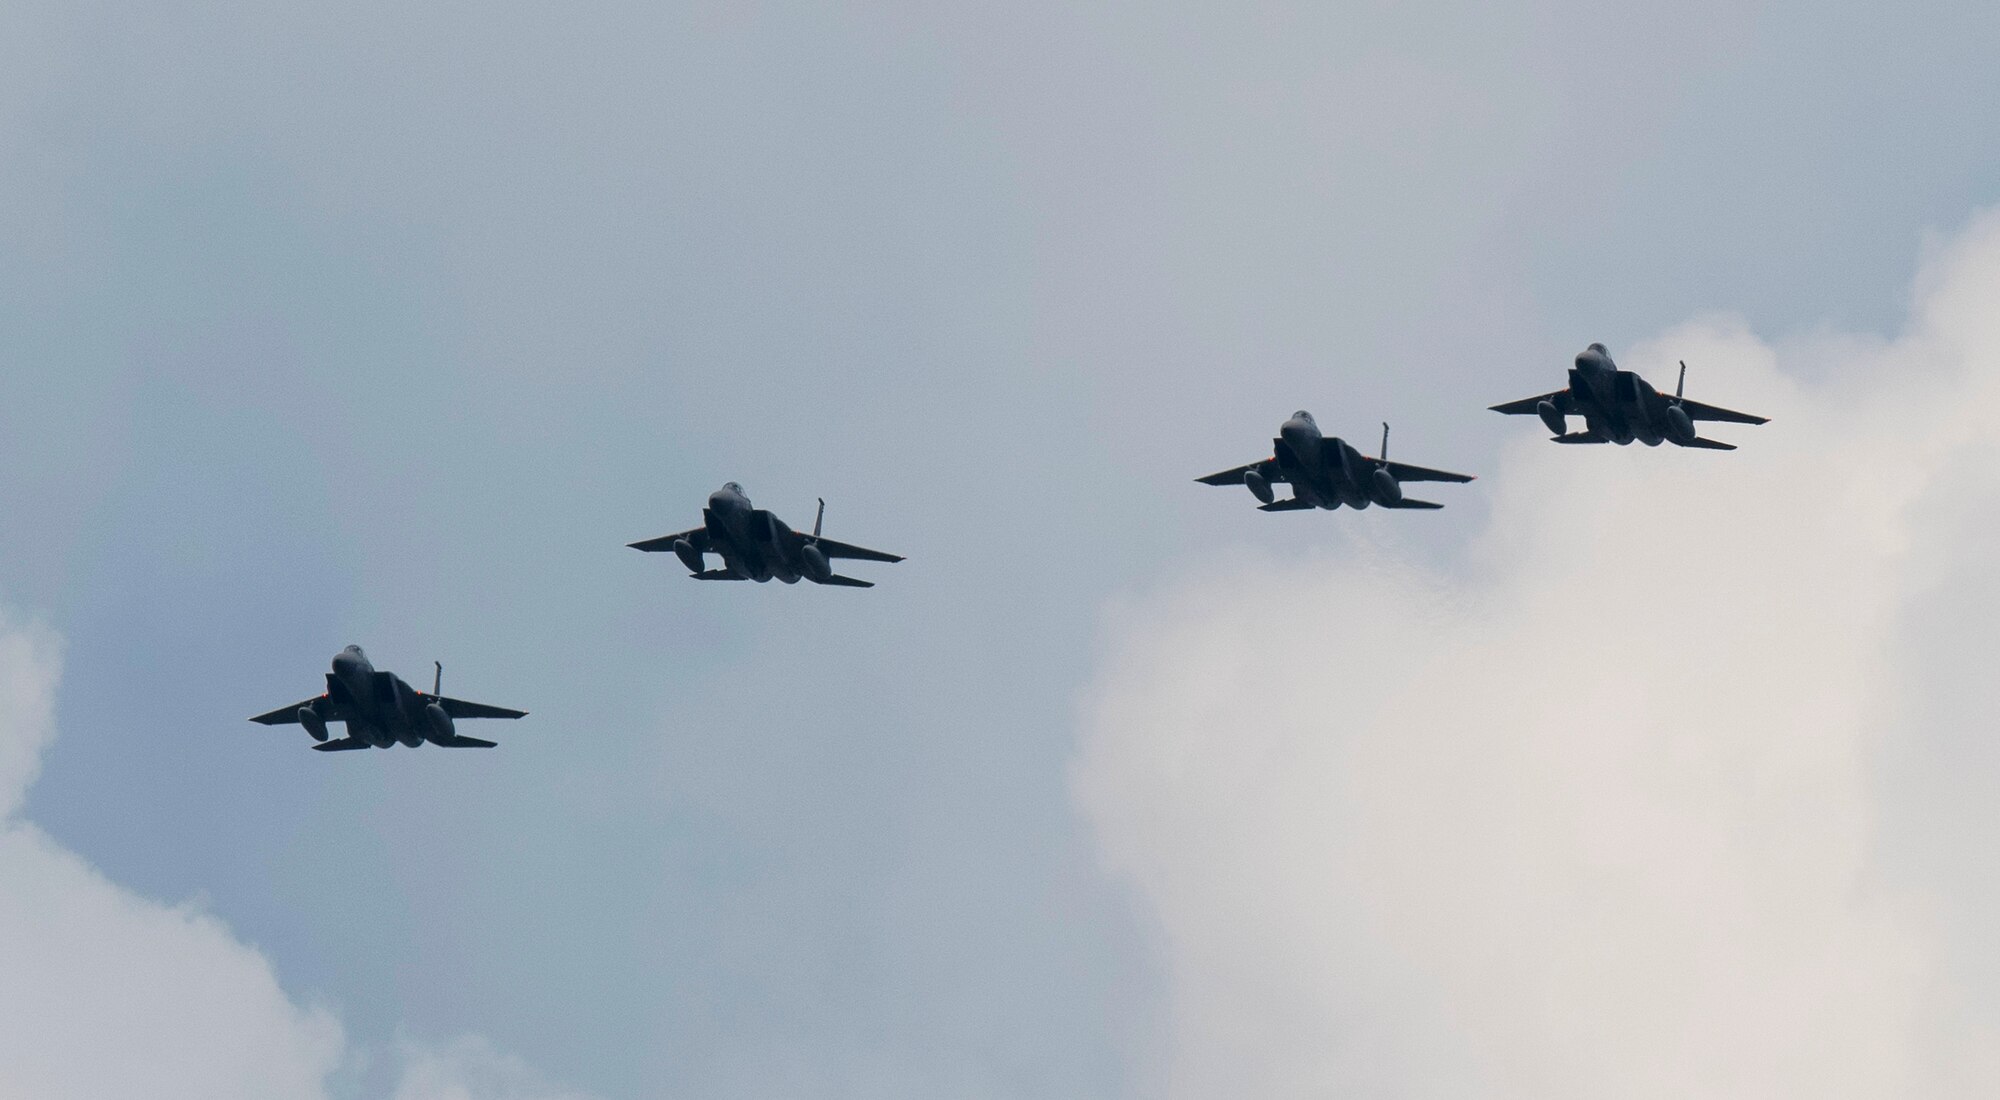 Four F-15C Eagles assigned to the 493rd Fighter Squadron return to Royal Air Force Lakenheath, England, July 12, 2019. Members from the 493rd FS and 748th Aircraft Maintenance Squadron were deployed to an undisclosed location for six months. (U.S. Air Force photo by Senior Airman Malcolm Mayfield)